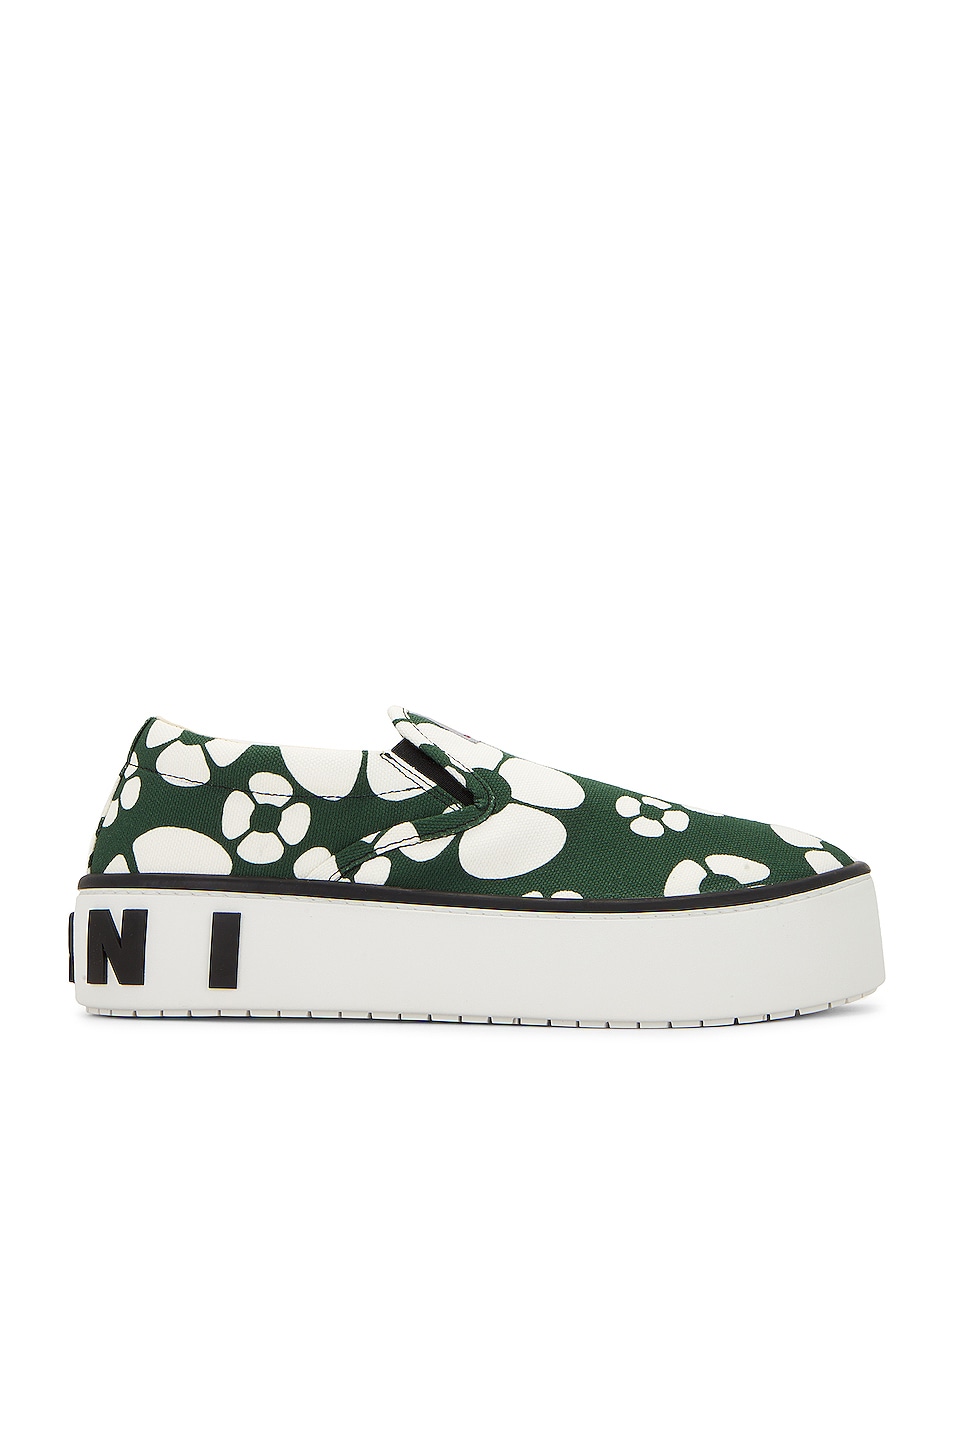 Image 1 of Marni x Carhartt Paw Sneakers in Forest Green & Stone White